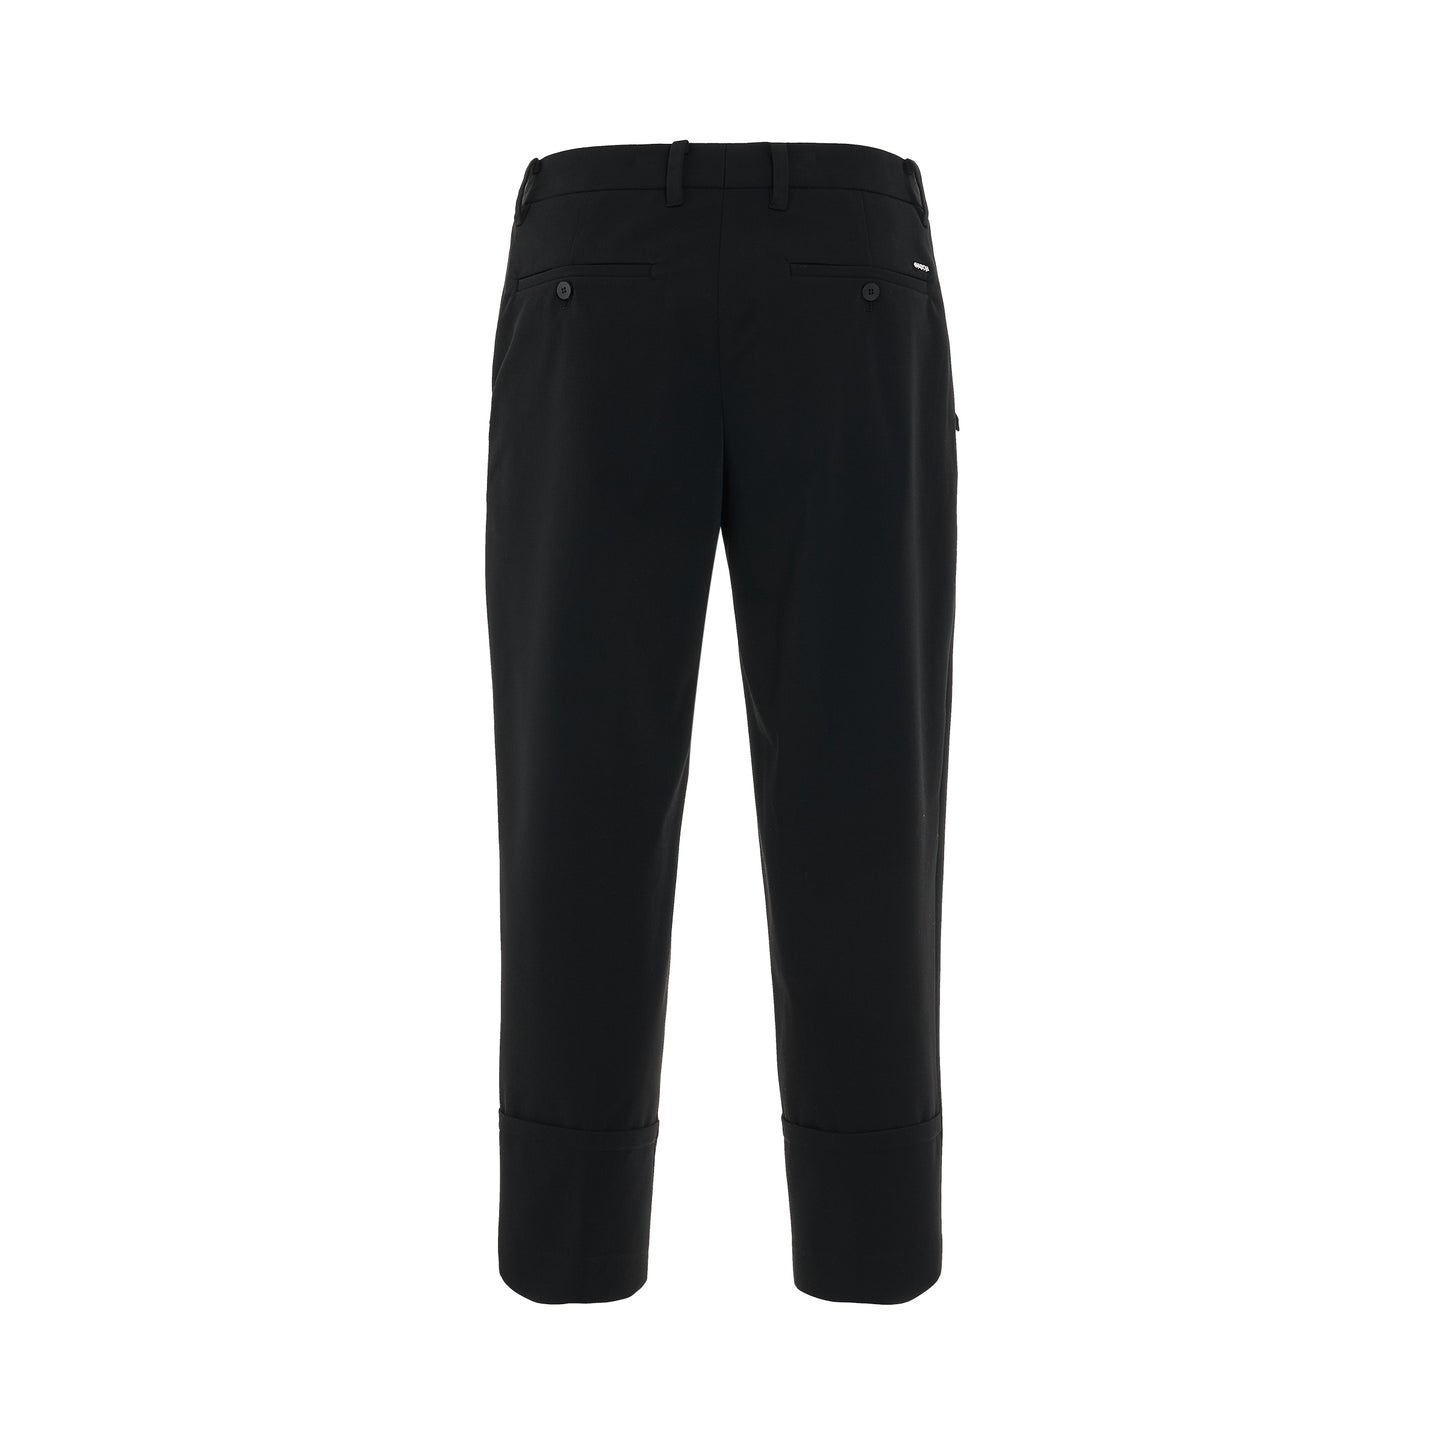 Cropped Cuff Detail Pants in Black